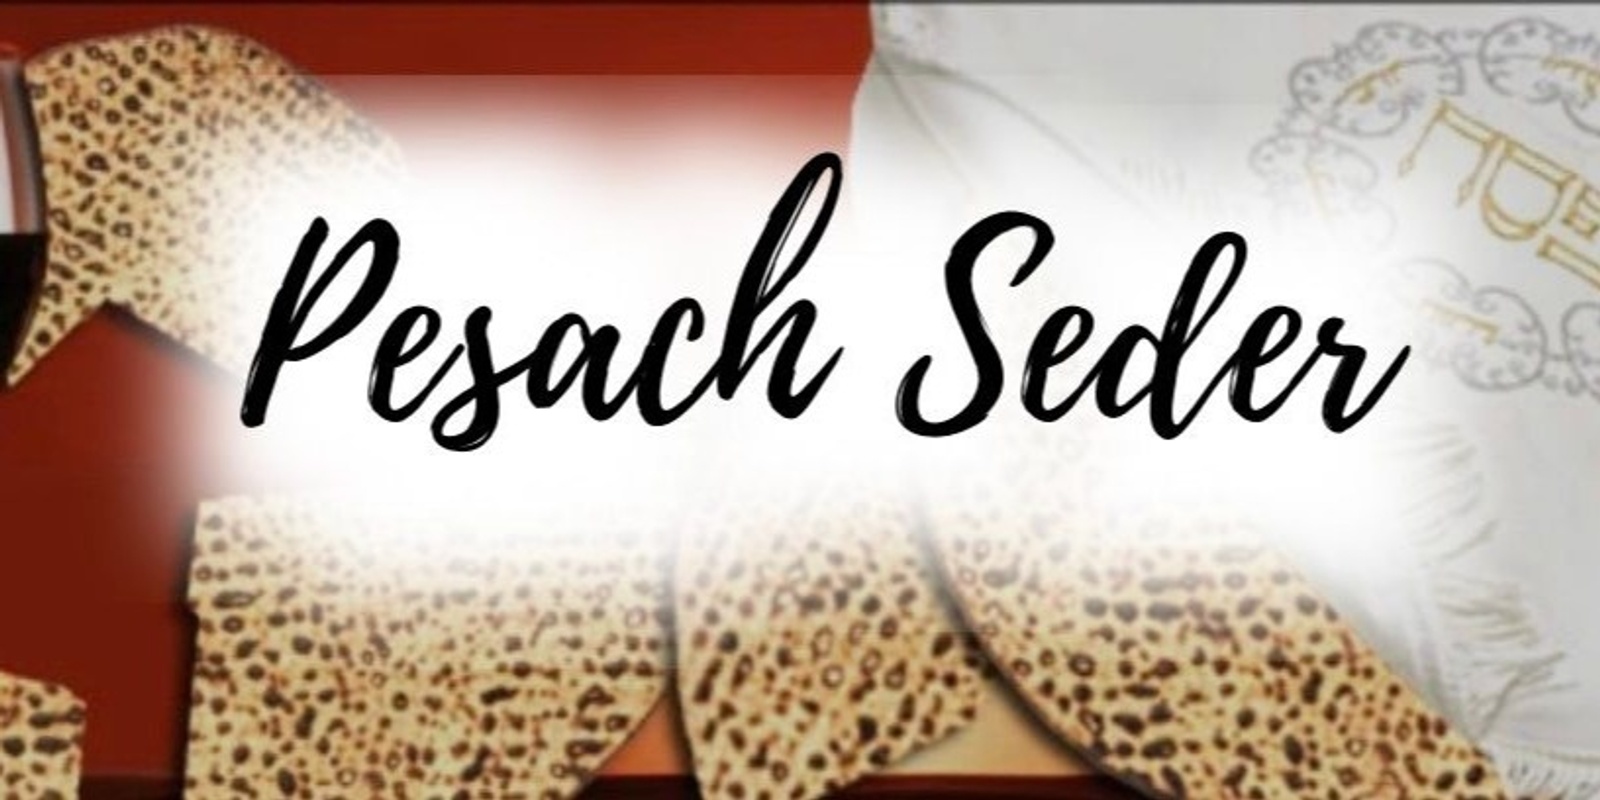 Banner image for Pesach Seder - First Night